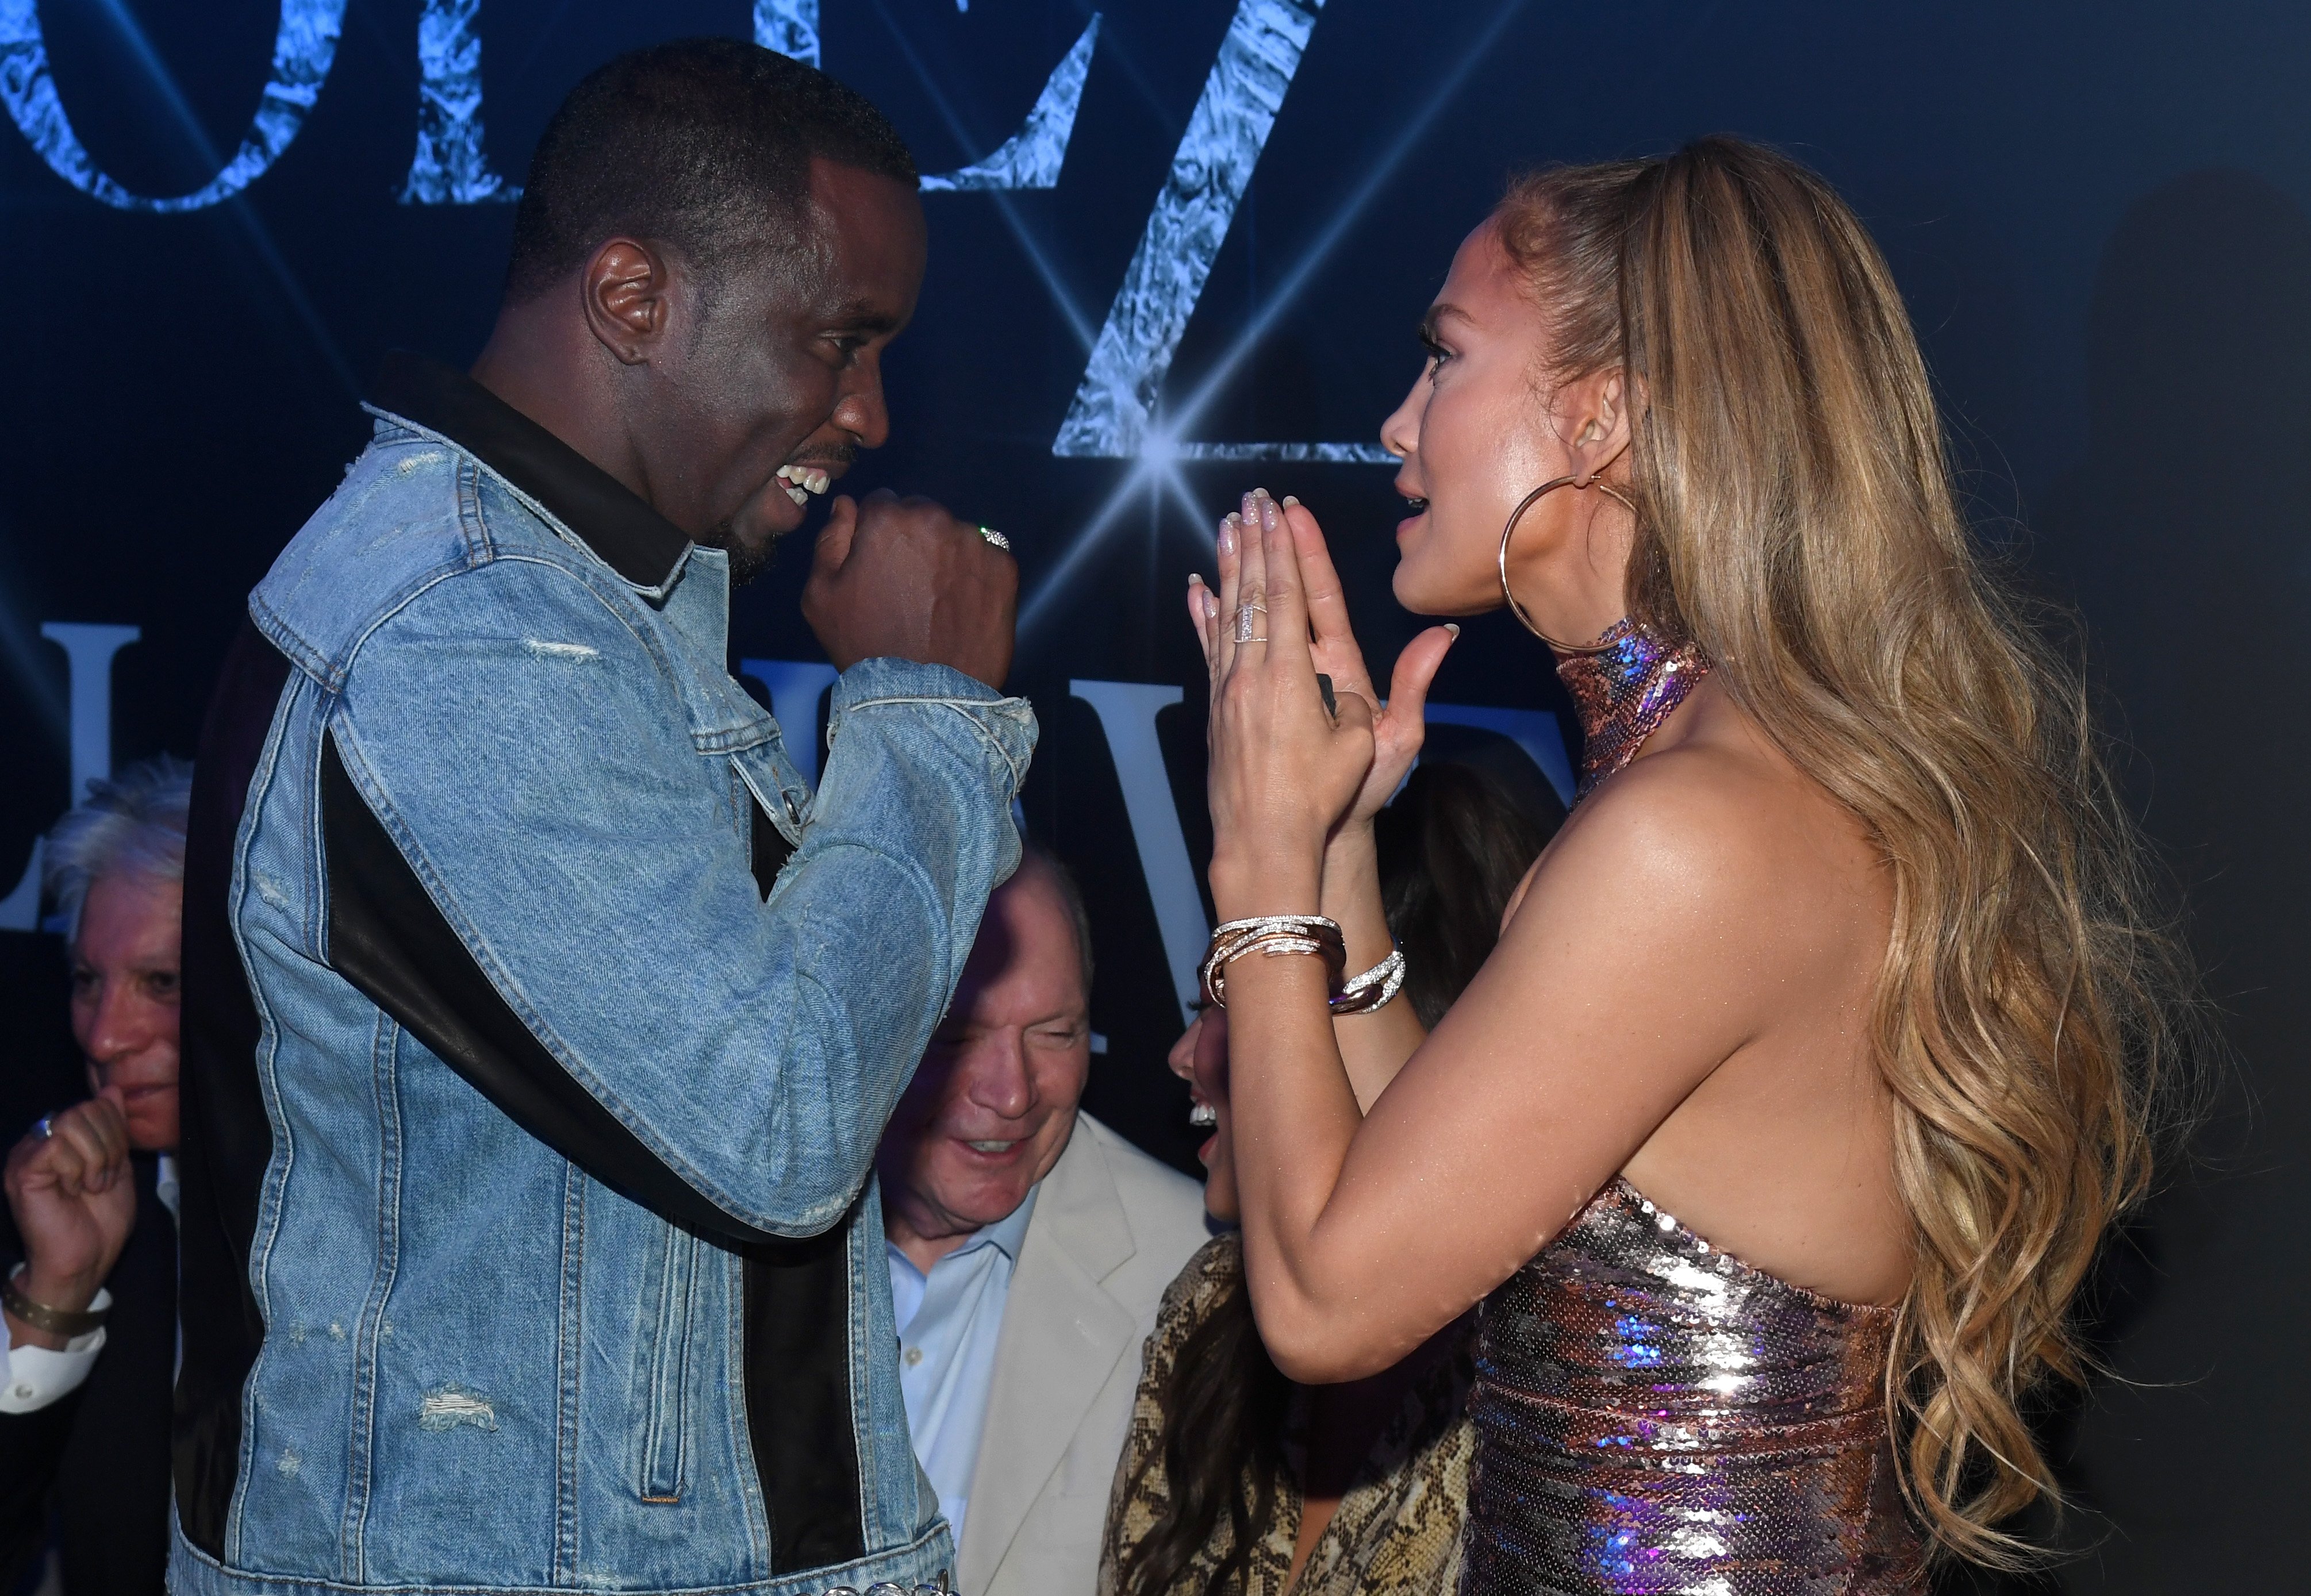 Sean 'Diddy' Combs and Jennifer Lopez have a conversation during a party